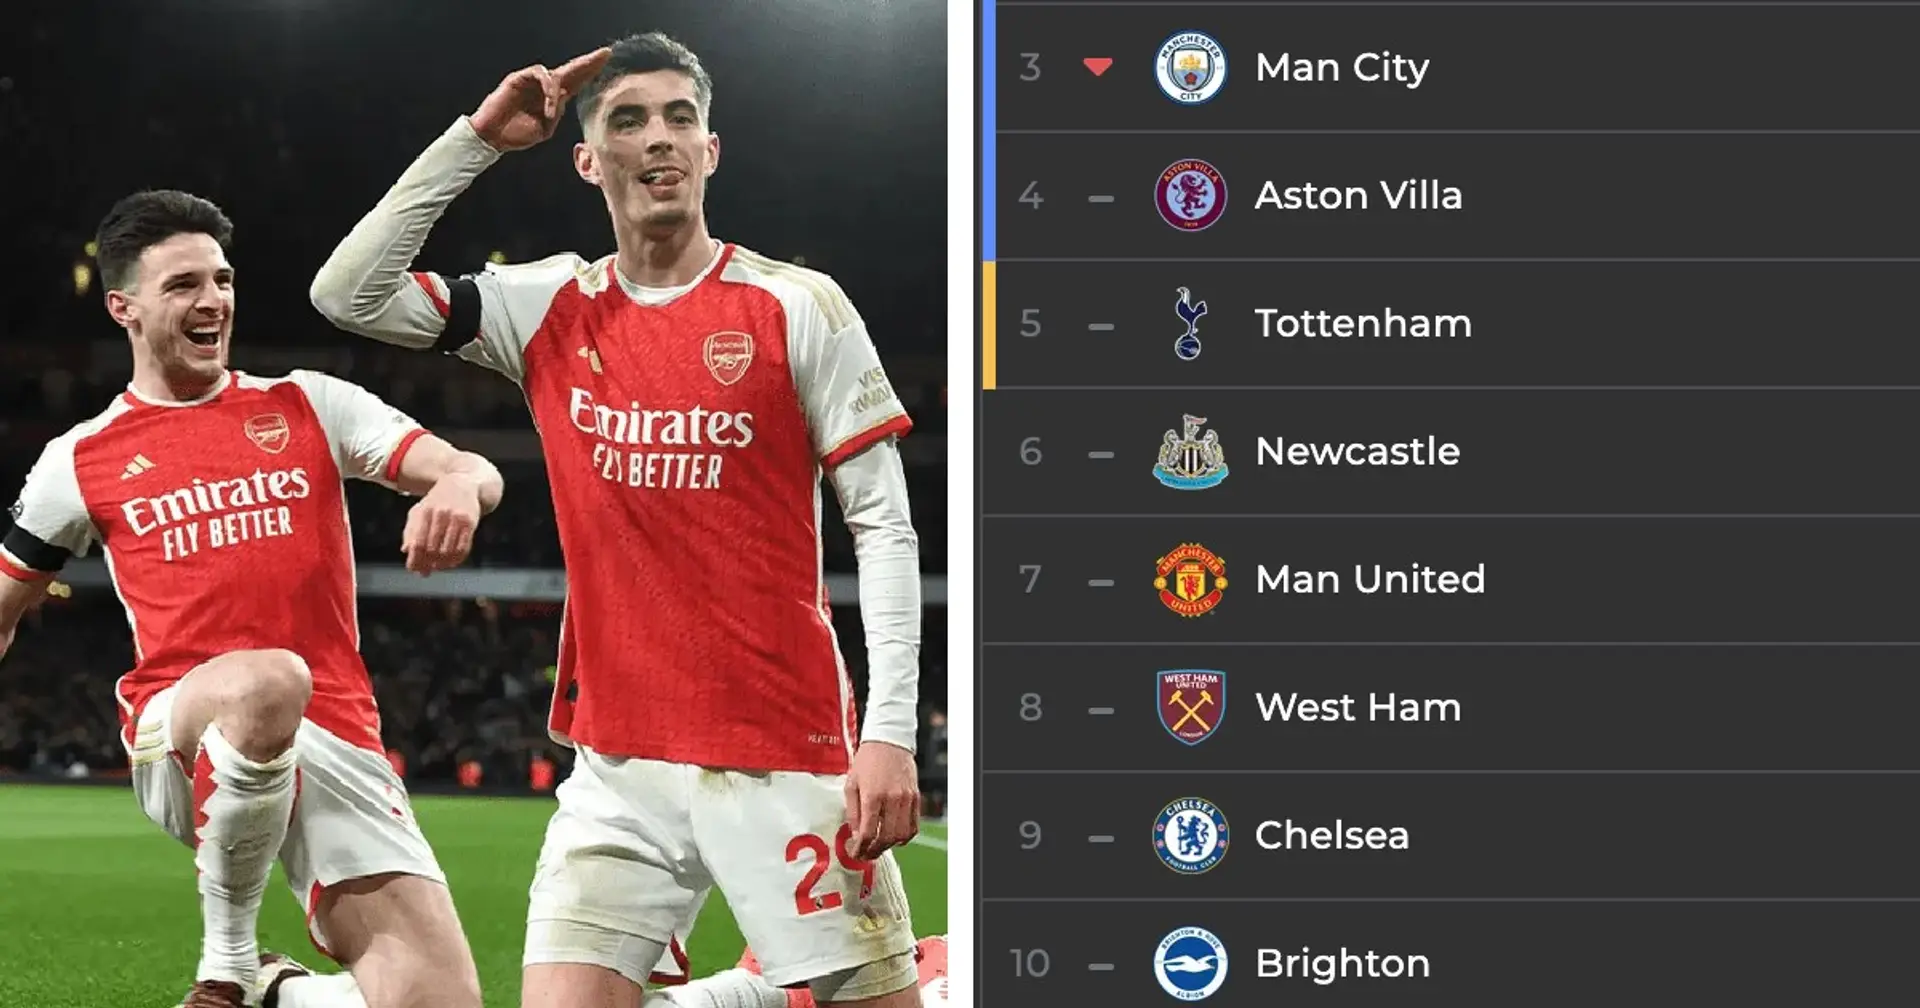 Arsenal hammer Chelsea to extend lead at the top: Updated Premier League standings